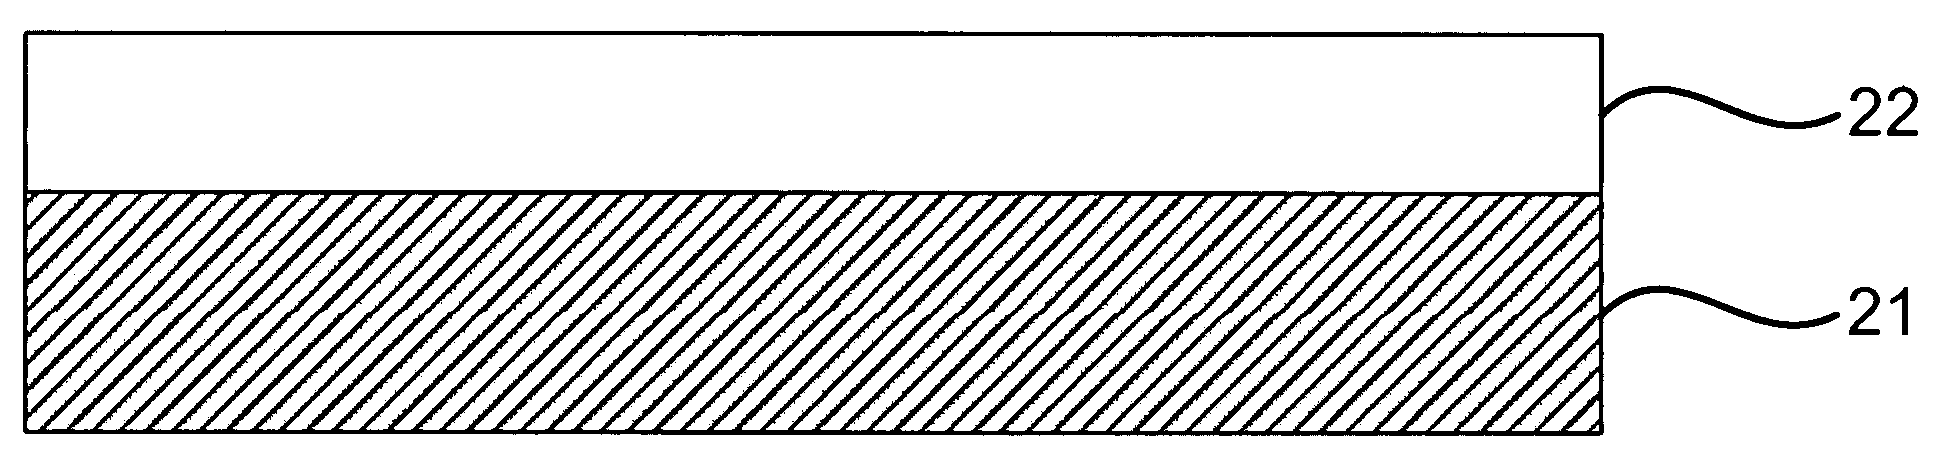 Structure of LiAlO2 substrate having ZnO buffer layer